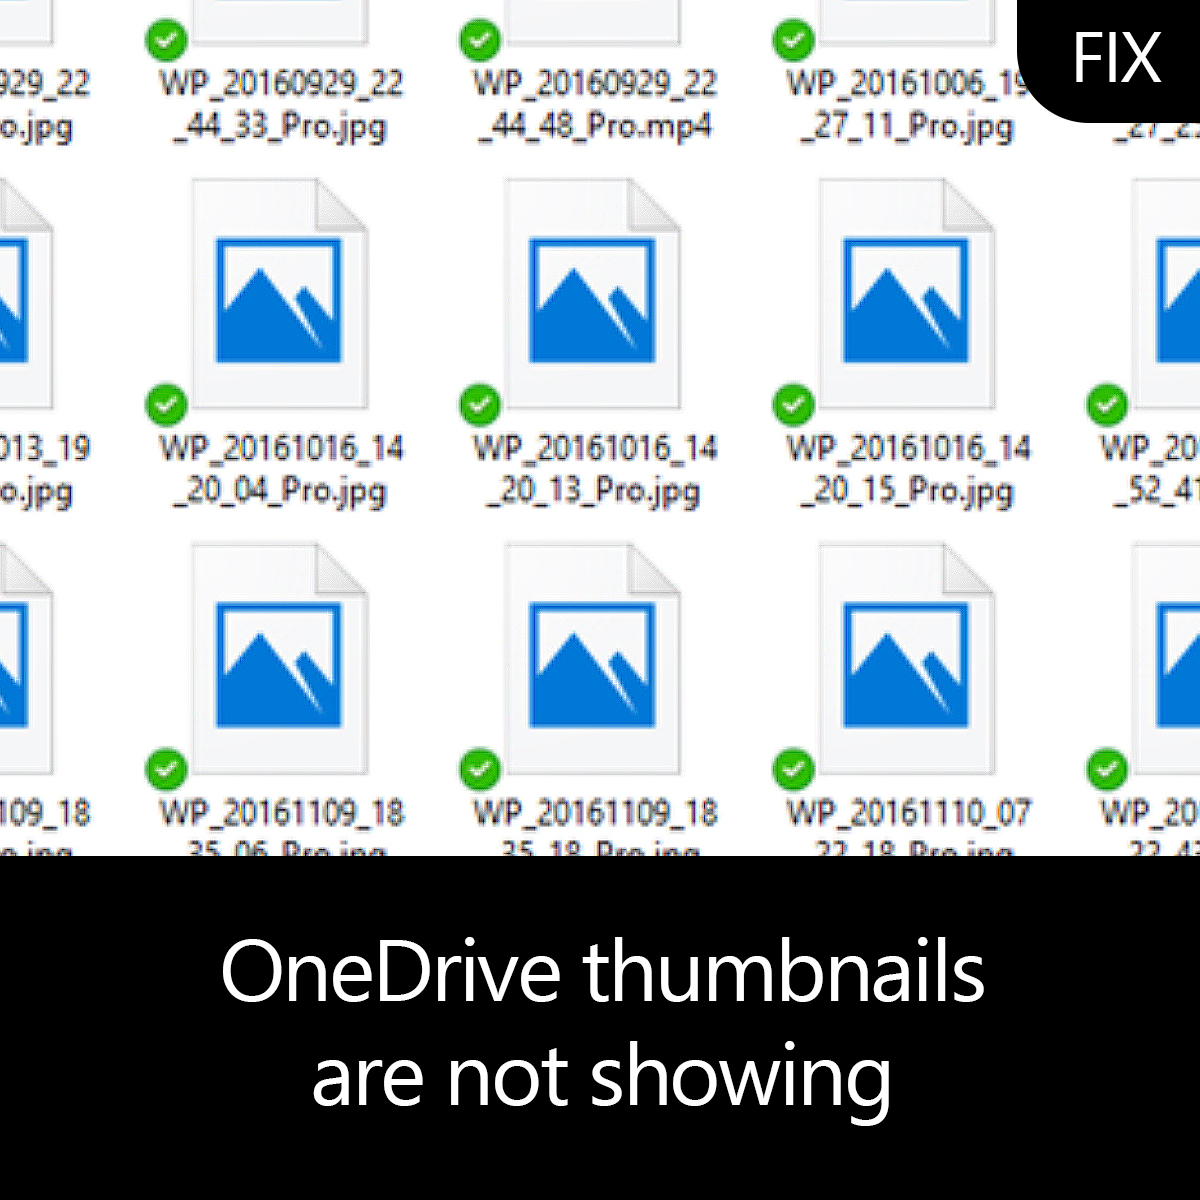 onedrive thumbnails not showing